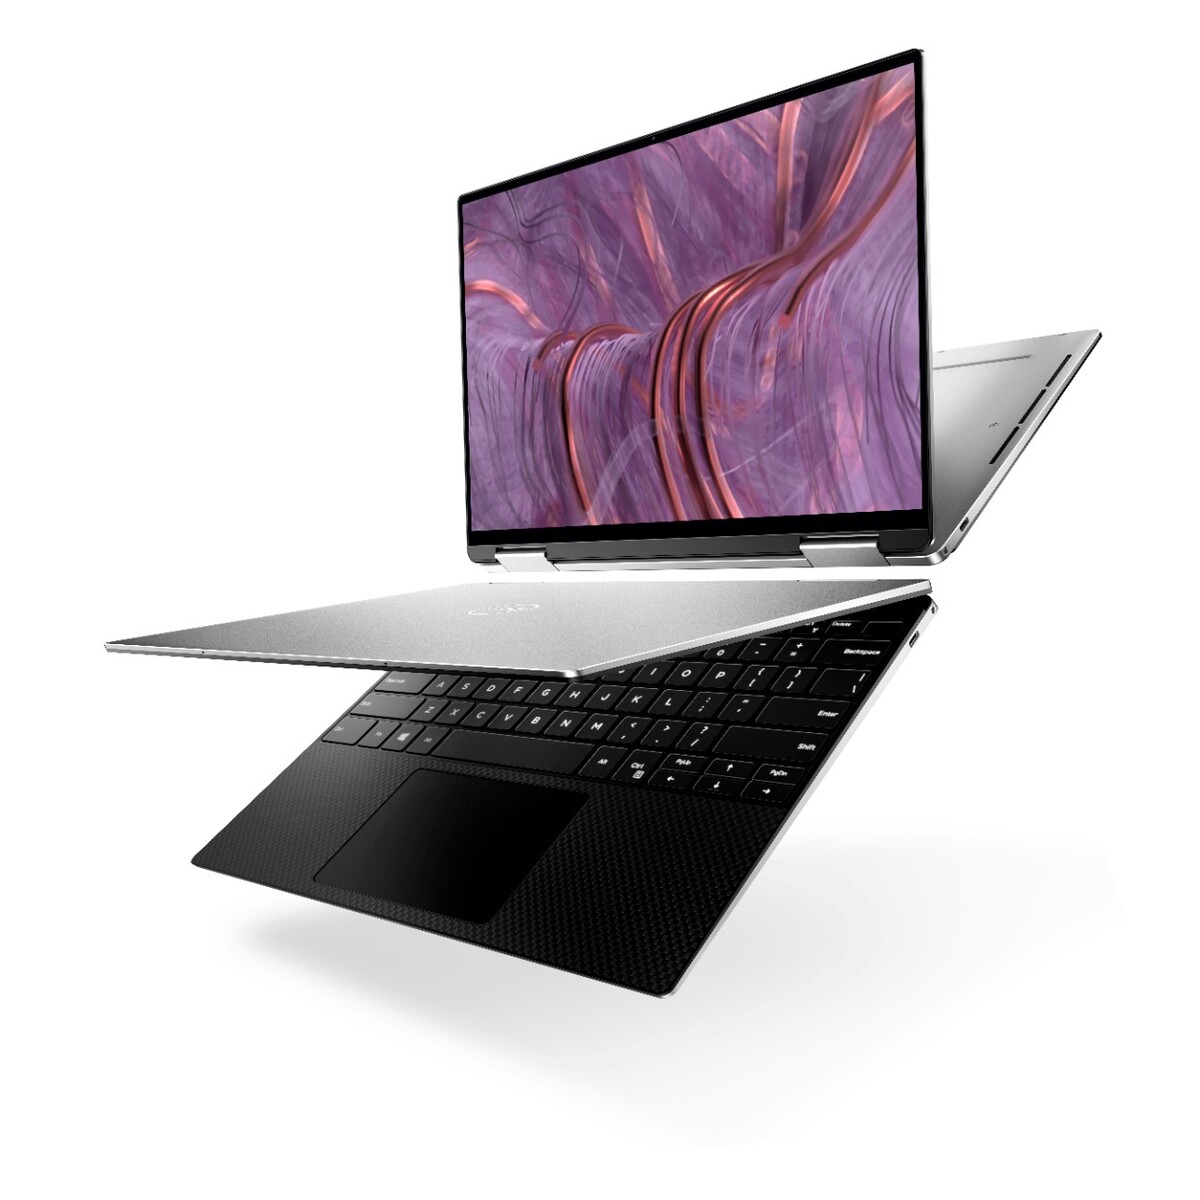 Dell Xps 13 9310 2 In 1 Gets Refreshed To Include Intel Tiger Lake Xe